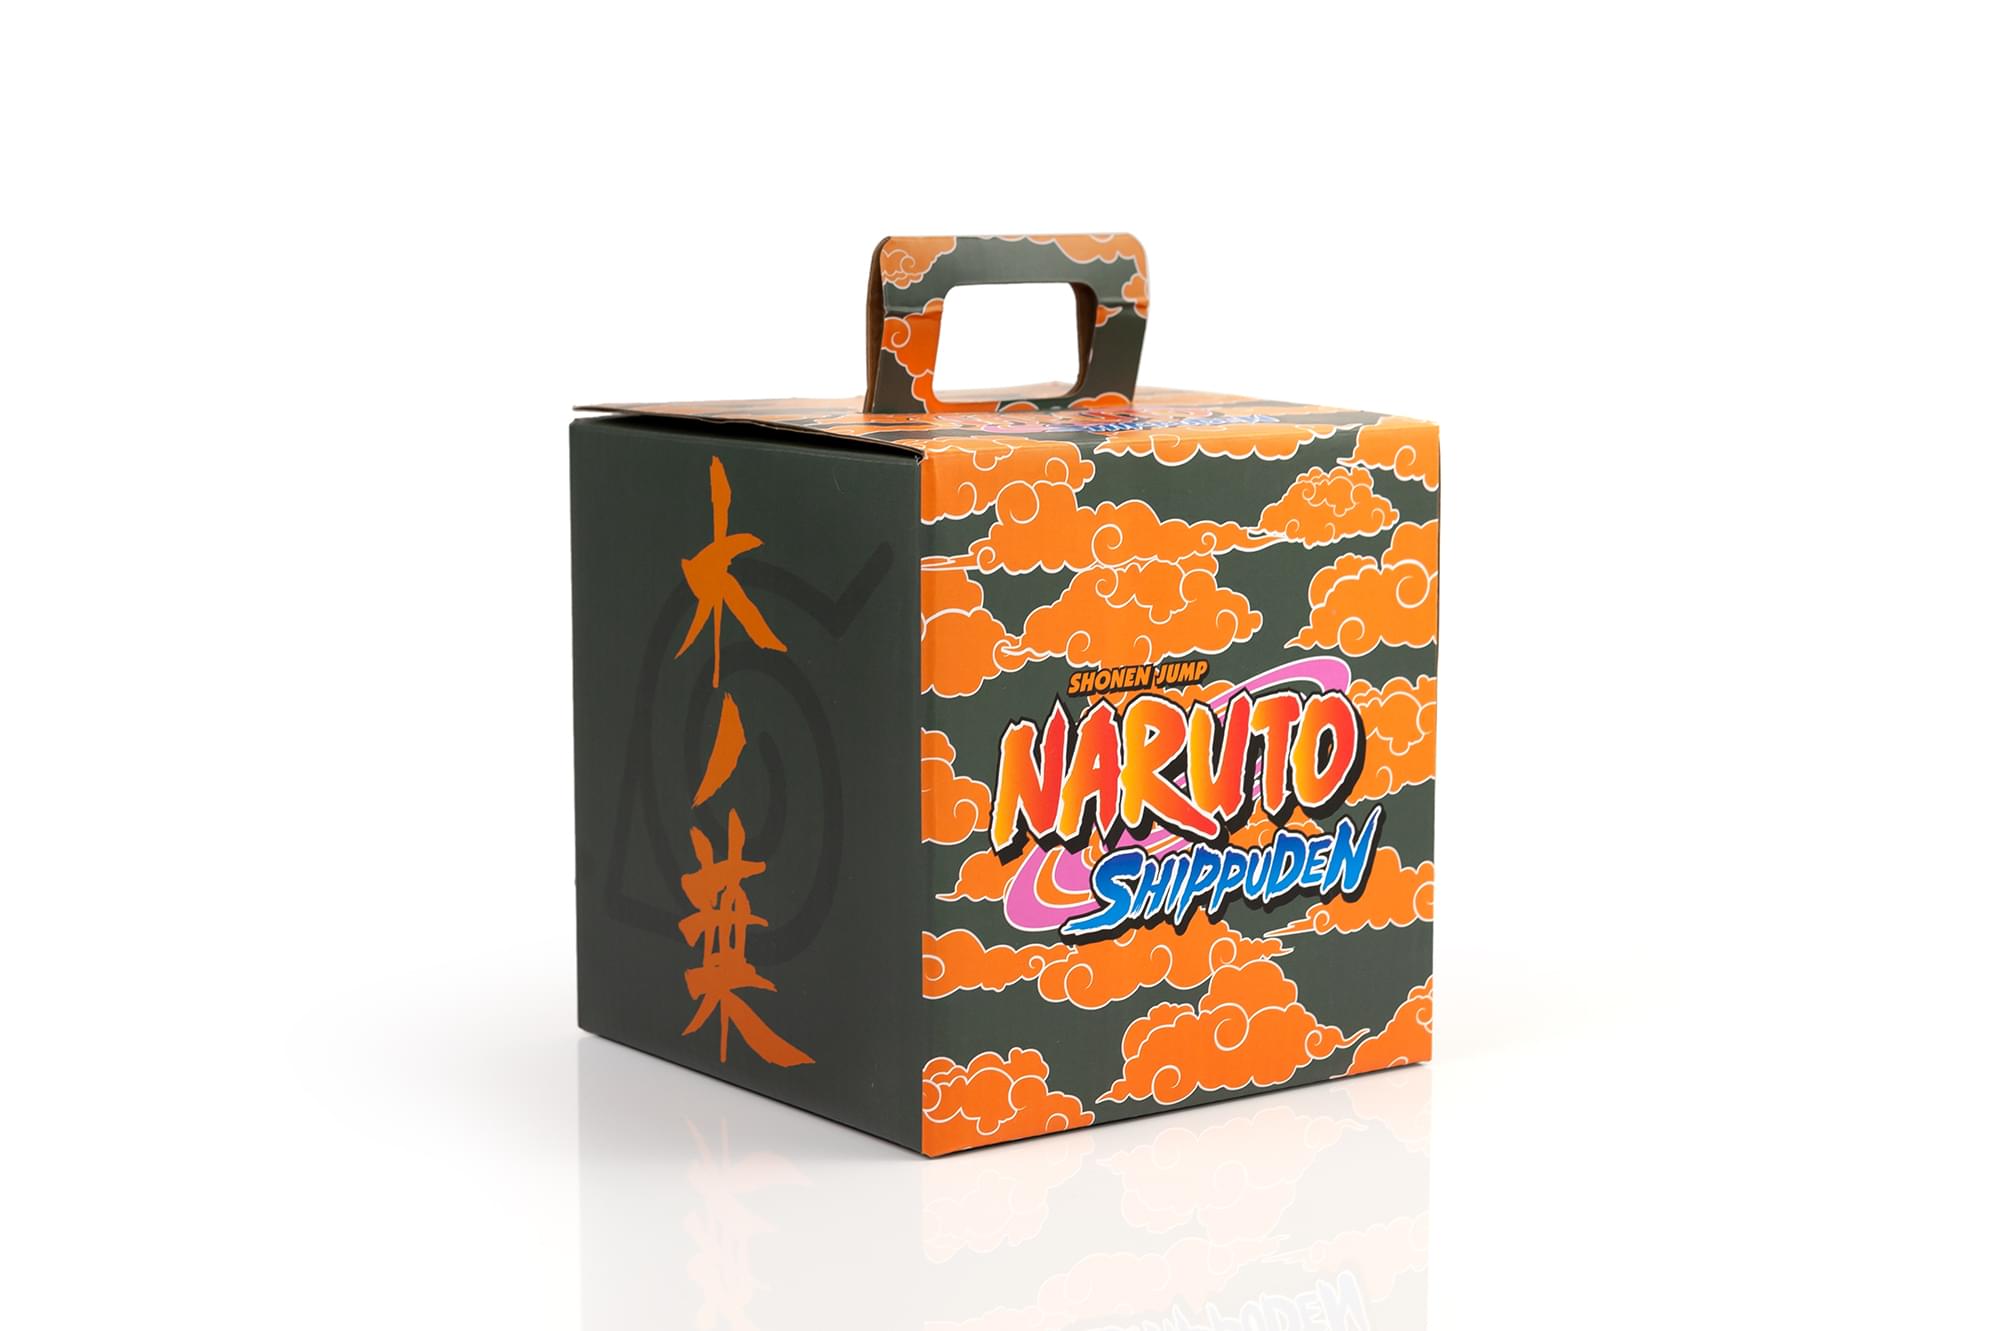 Naruto Shippuden Konoha Collectors Looksee Box , Includes 5 Themed Collectibles